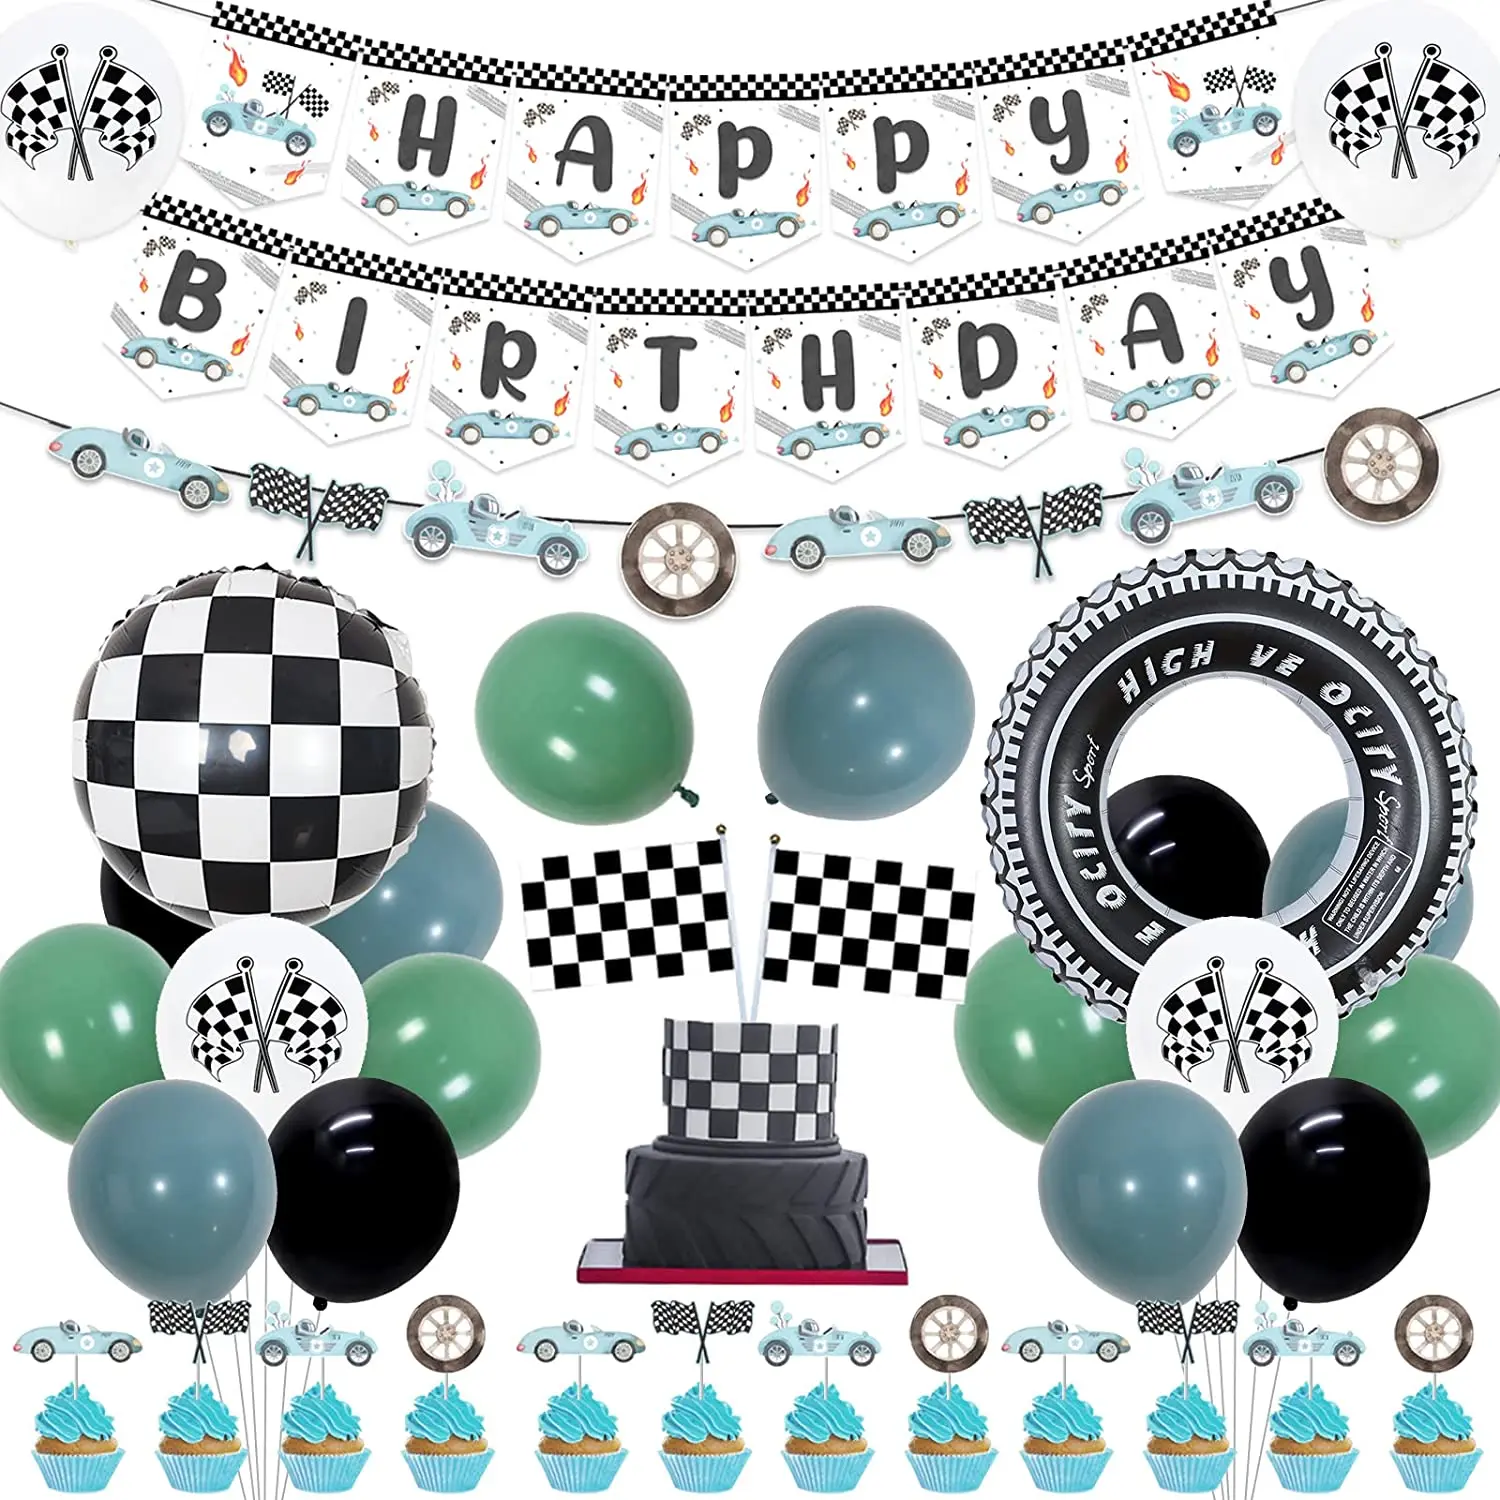 

Blue Race Car Birthday Decorations for Boys Racing Car Happy Birthday Banner Checkered Flag Cake Topper Balloons for Kids Party